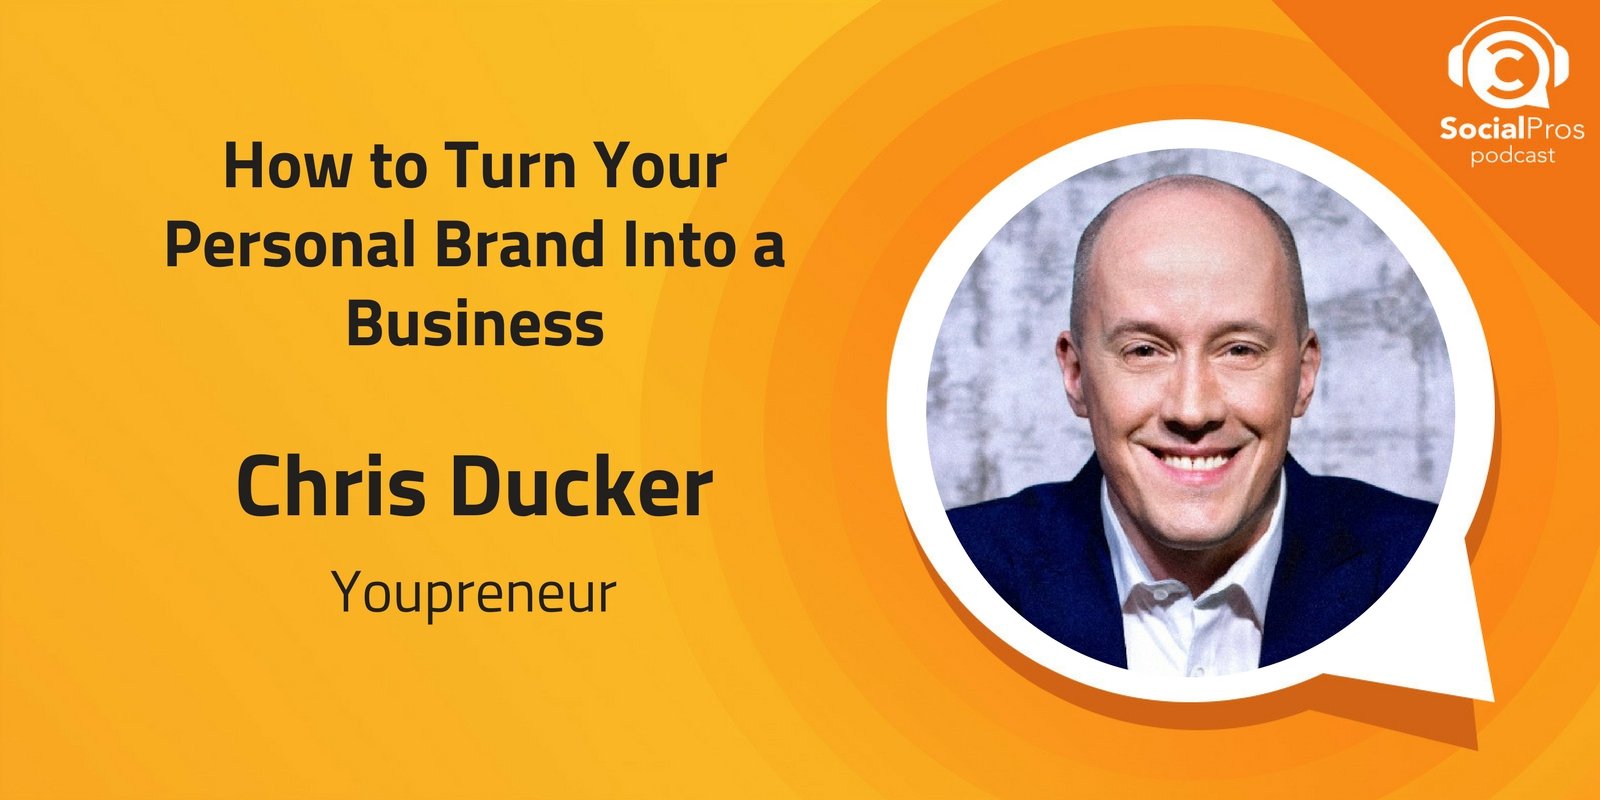 How to Turn Your Personal Brand Into a Business